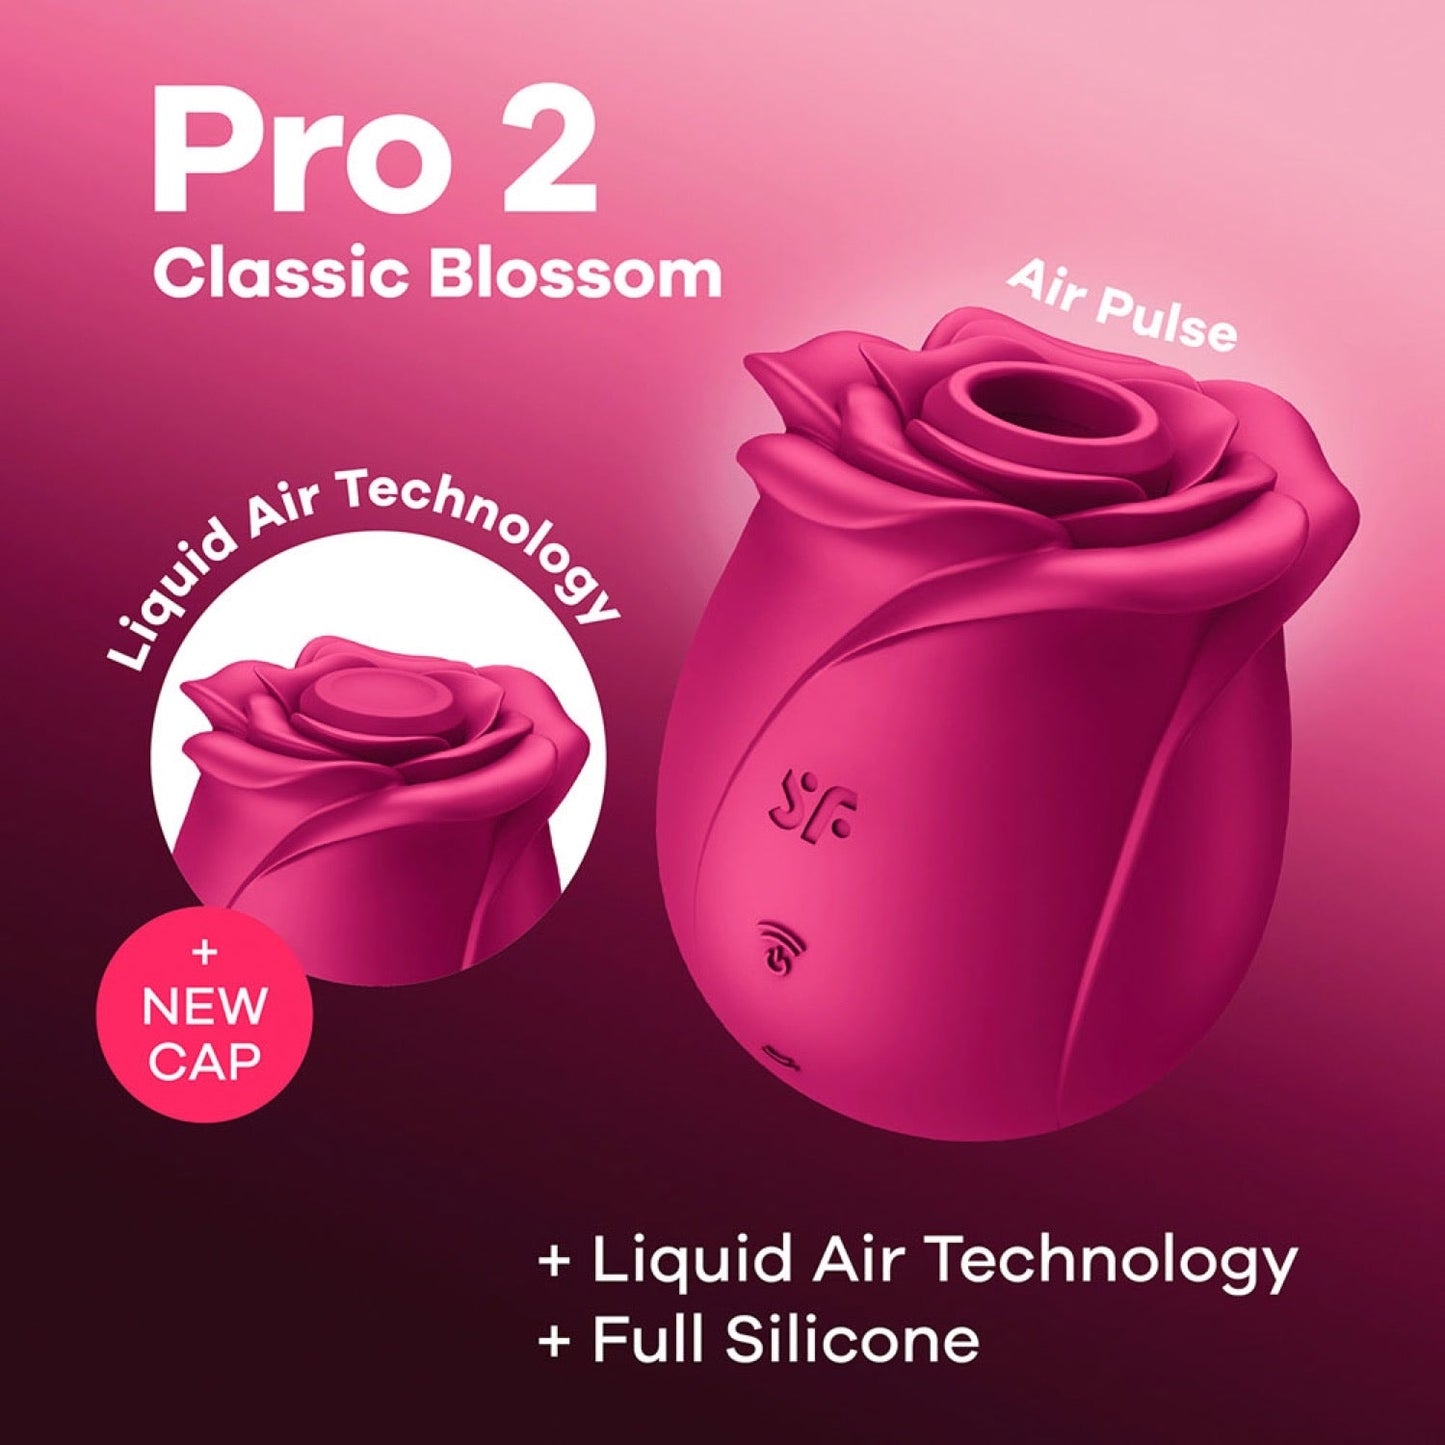 Pro 2 Classic Blossom - Red